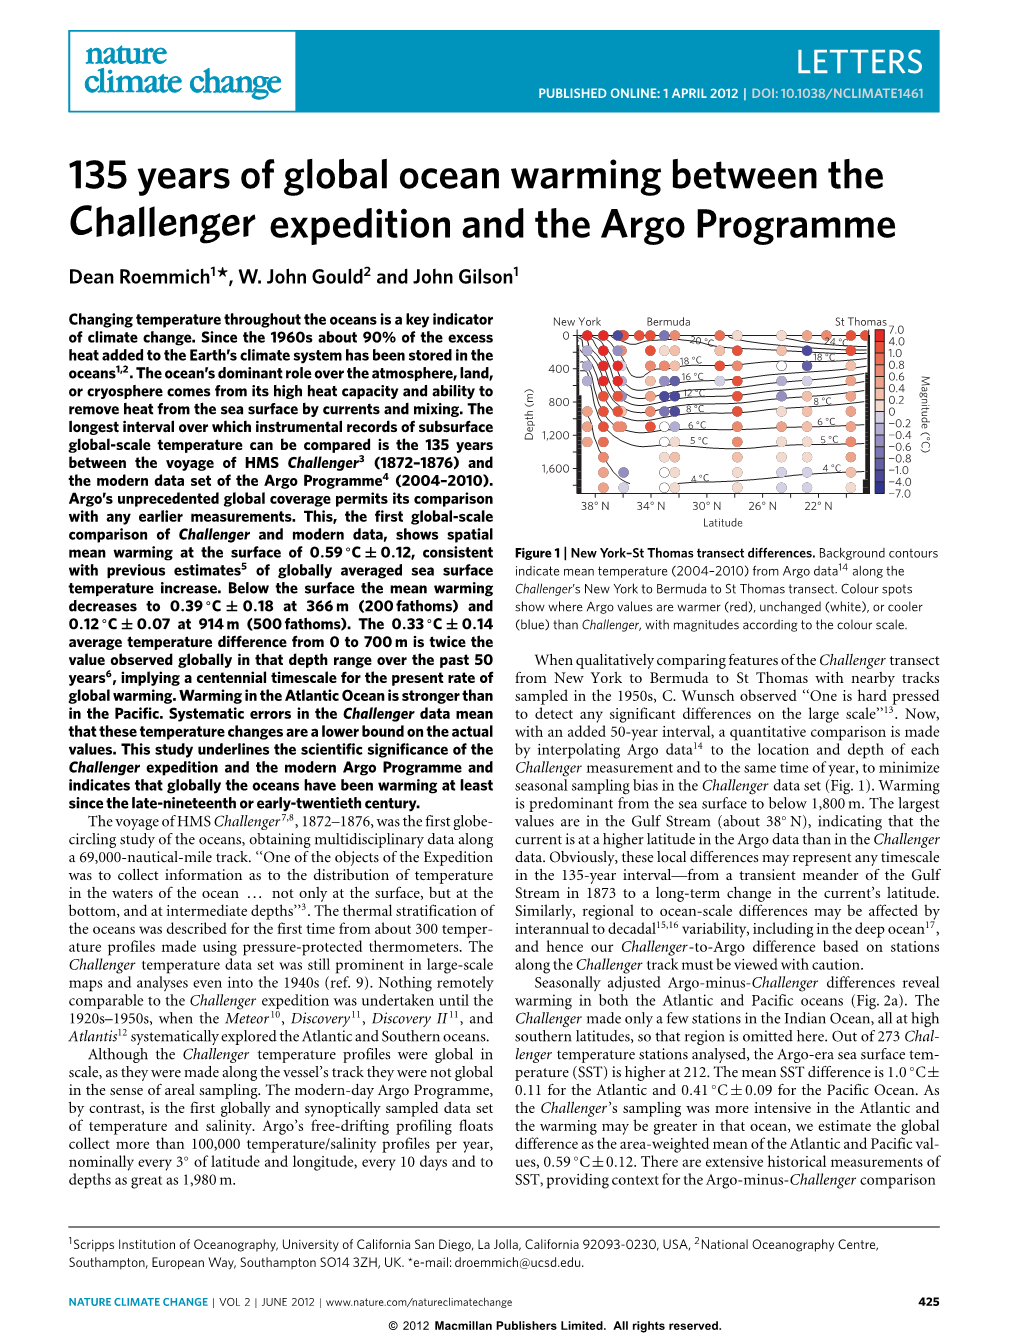 135 Years of Global Ocean Warming Between the Challenger Expedition and the Argo Programme Dean Roemmich1*, W